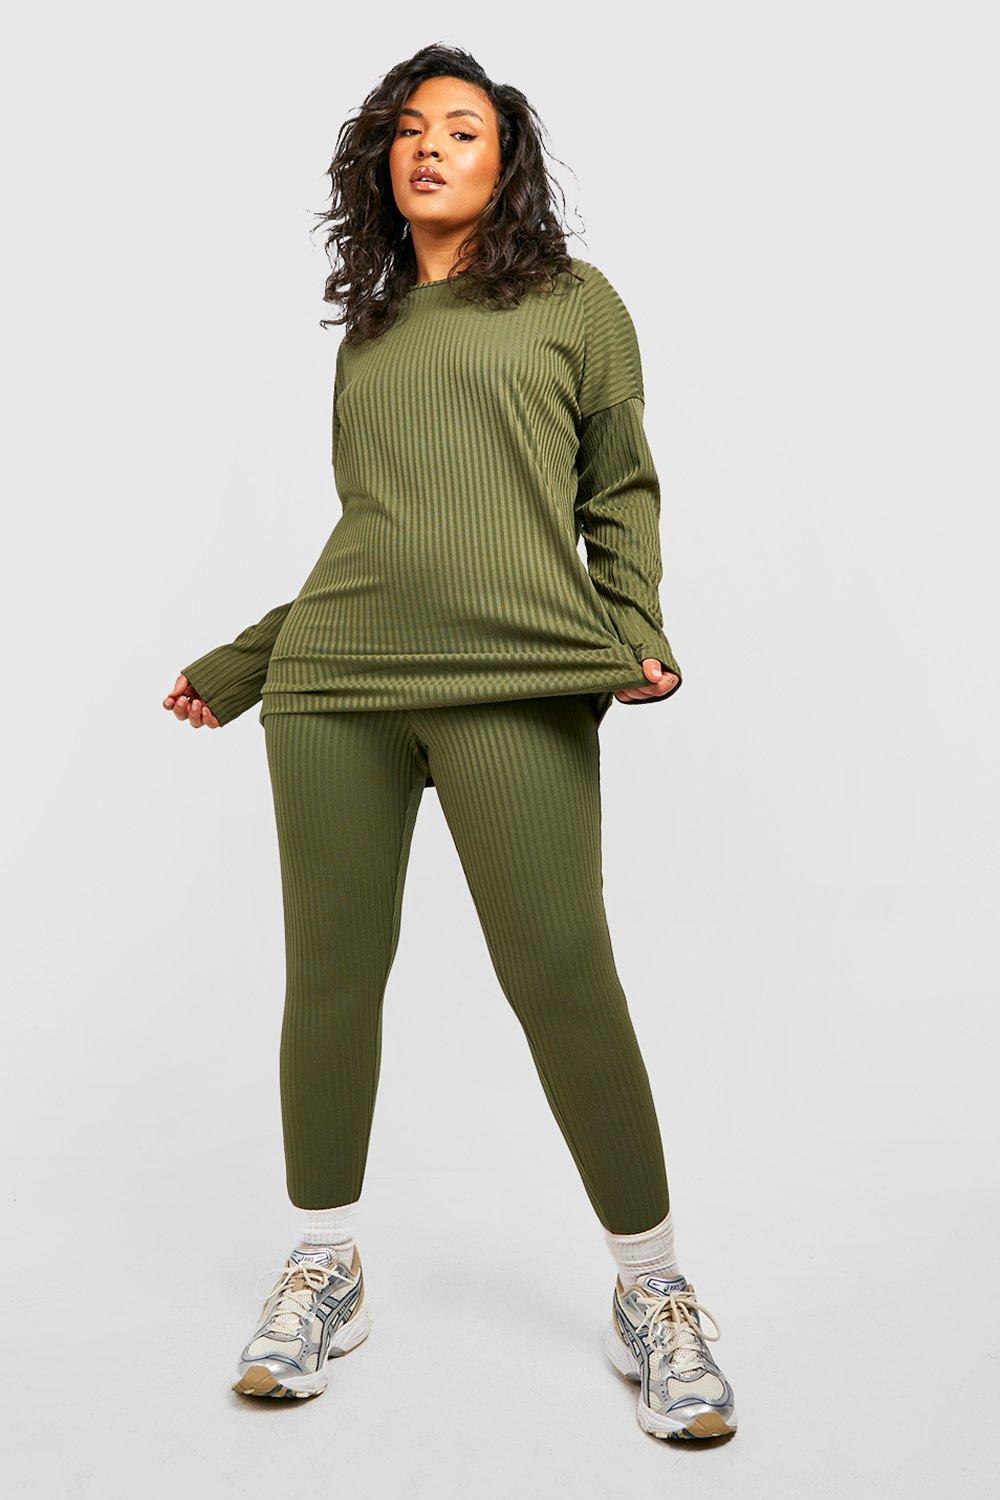 Dropship Plus Size Rib Knit Solid Long Sleeve Hoodie Tops & Leggings Set; Women's  Plus High Stretch Casual 2pcs Set Co-ords to Sell Online at a Lower Price